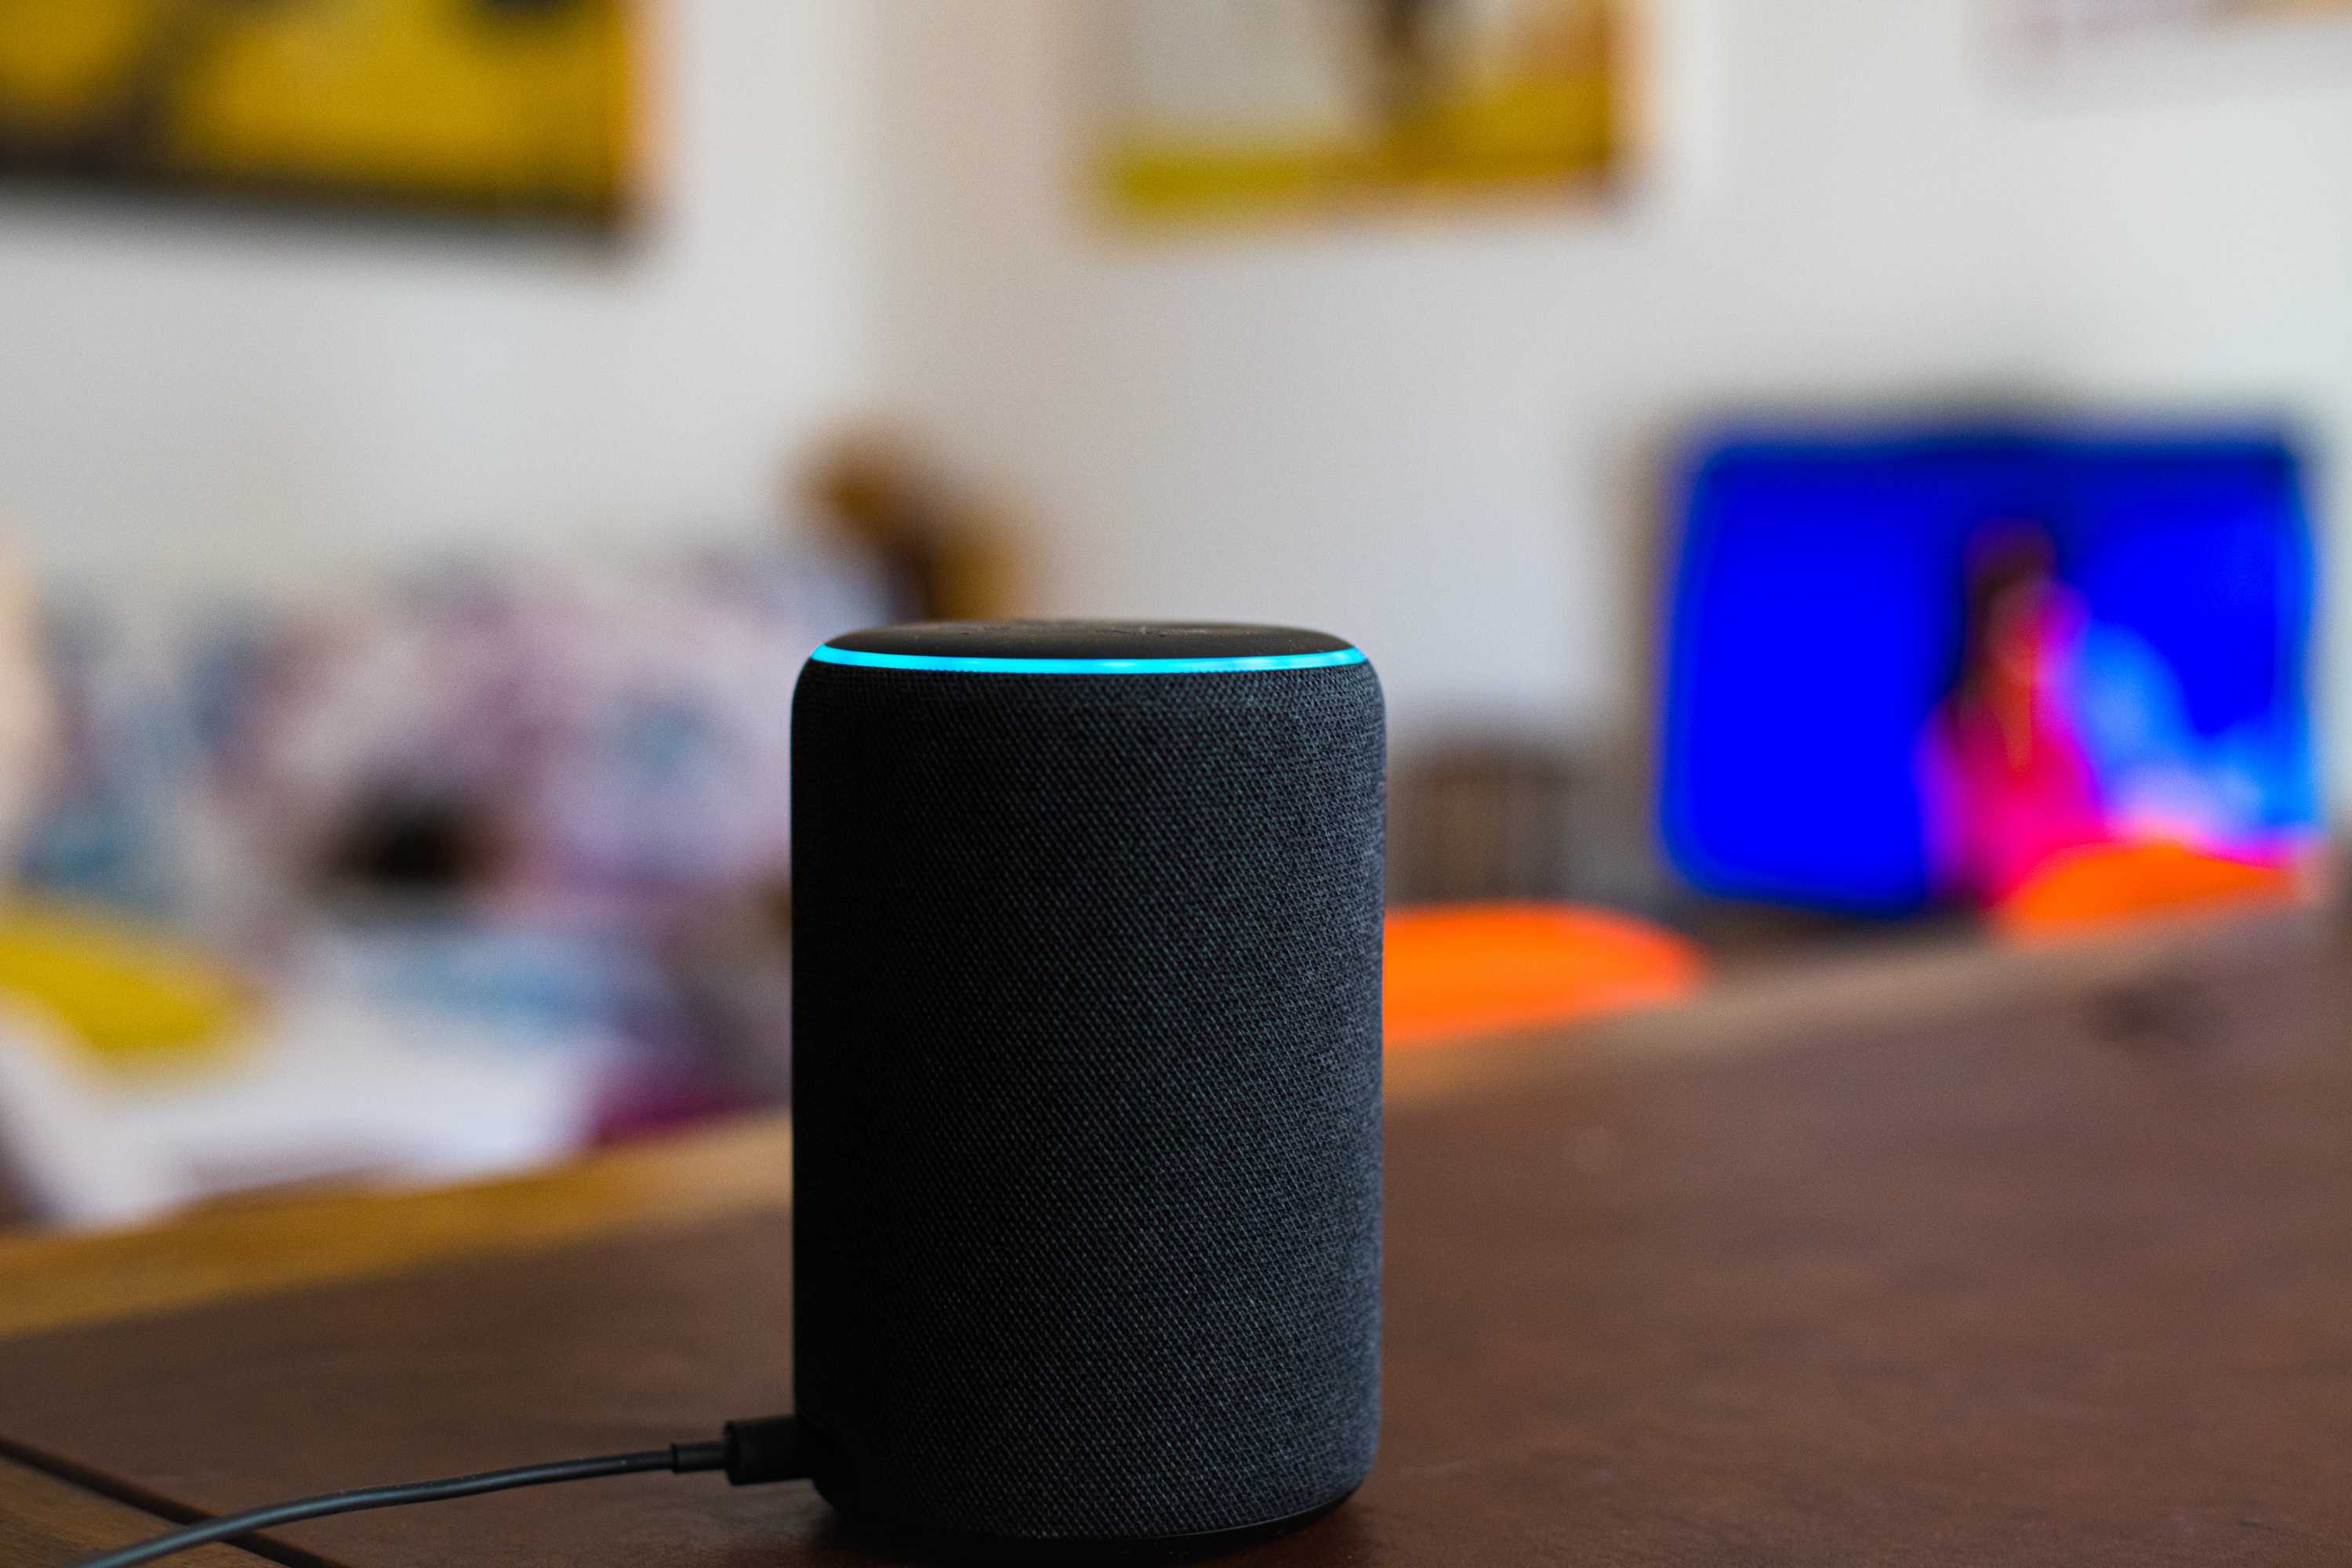 Should voice assistants use the voices of our loved ones?